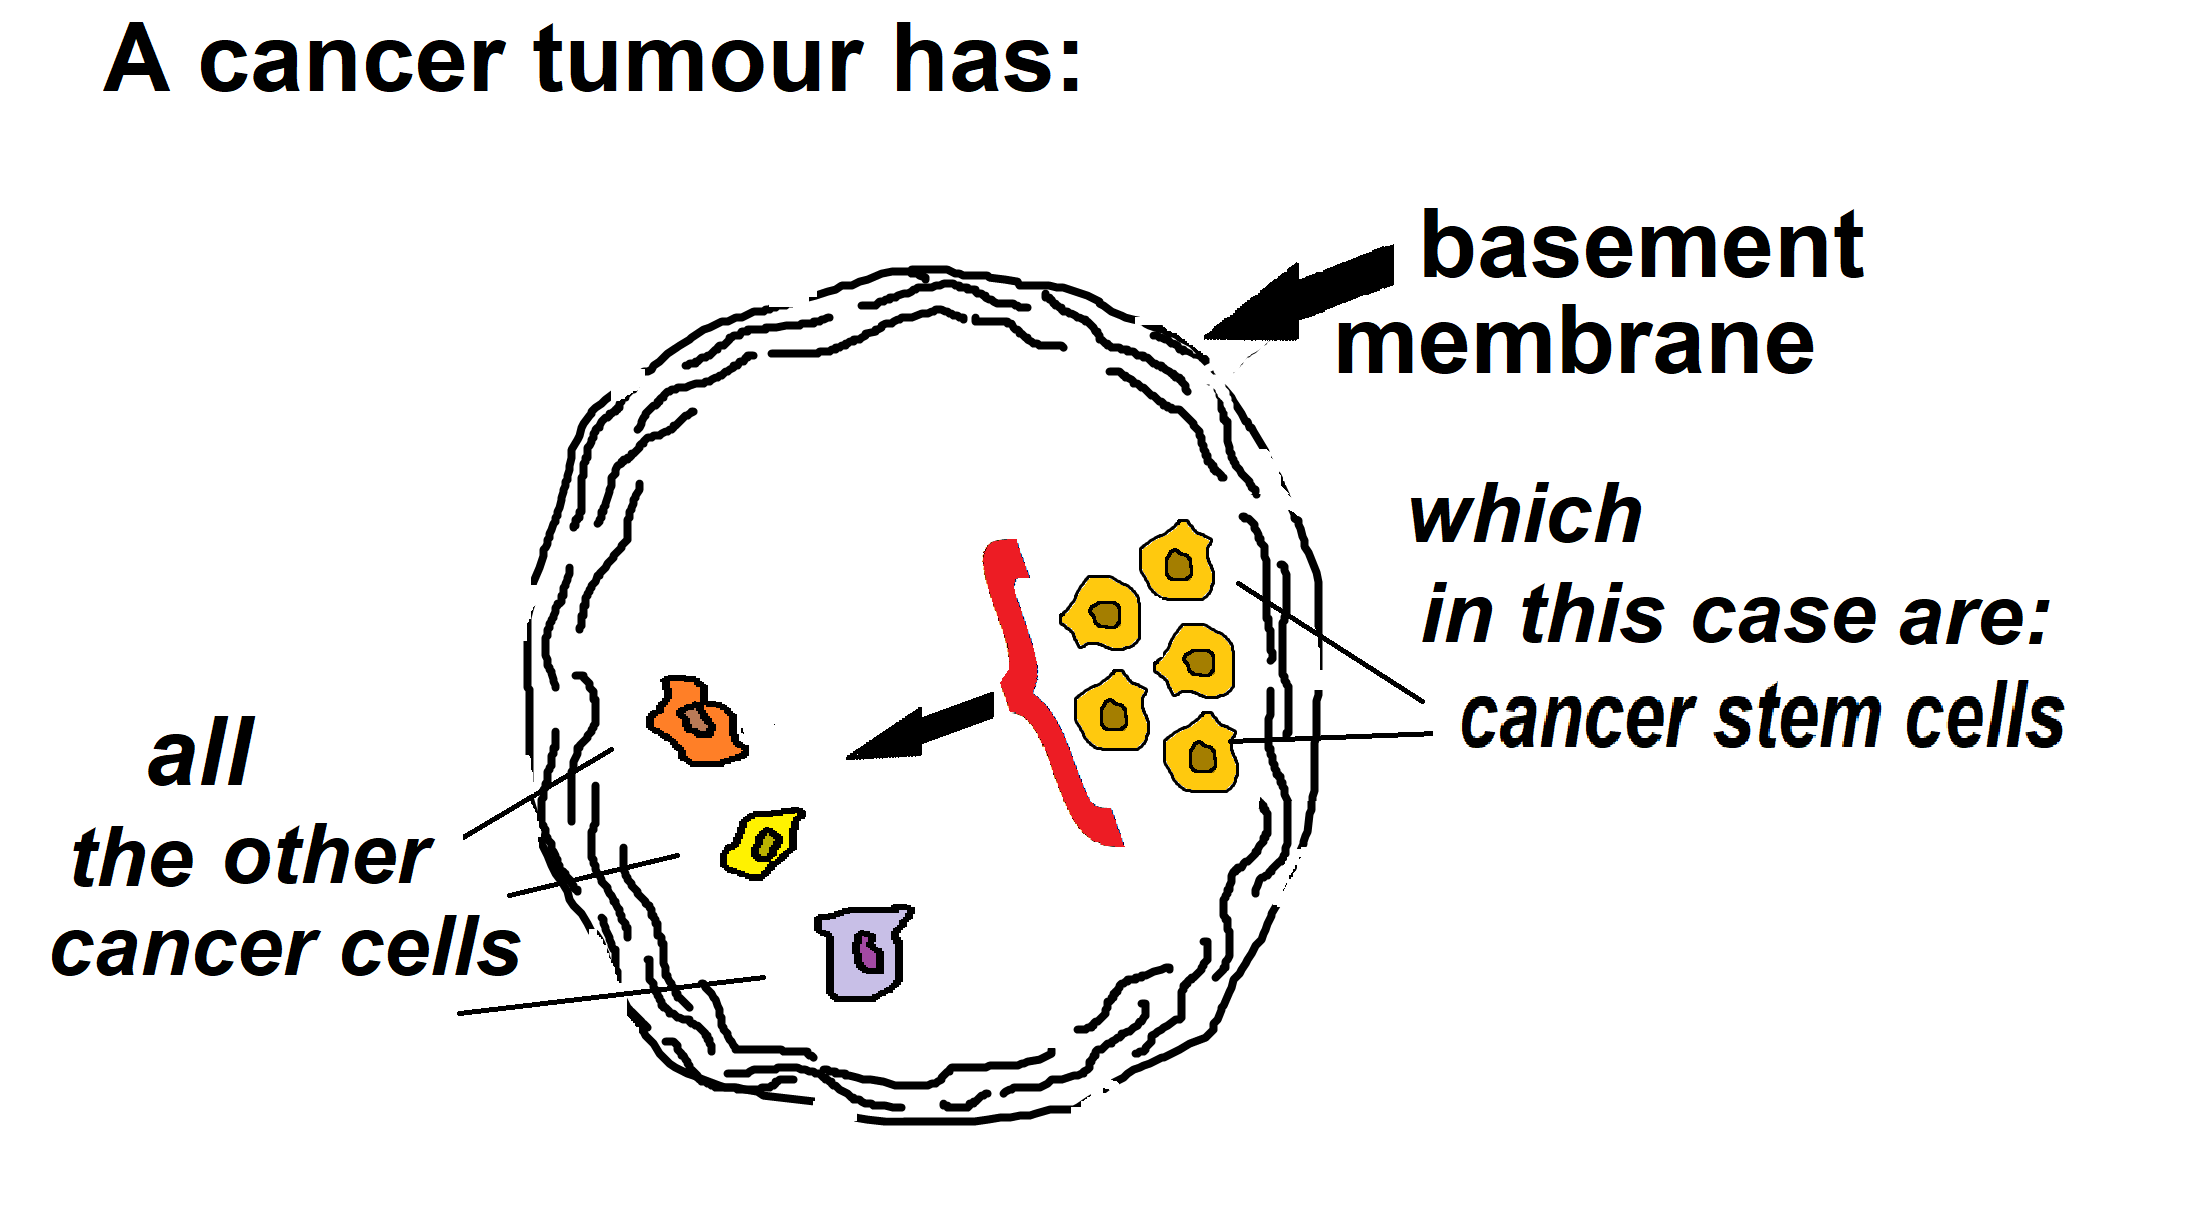 A cancer tumour has other cancer cells2add